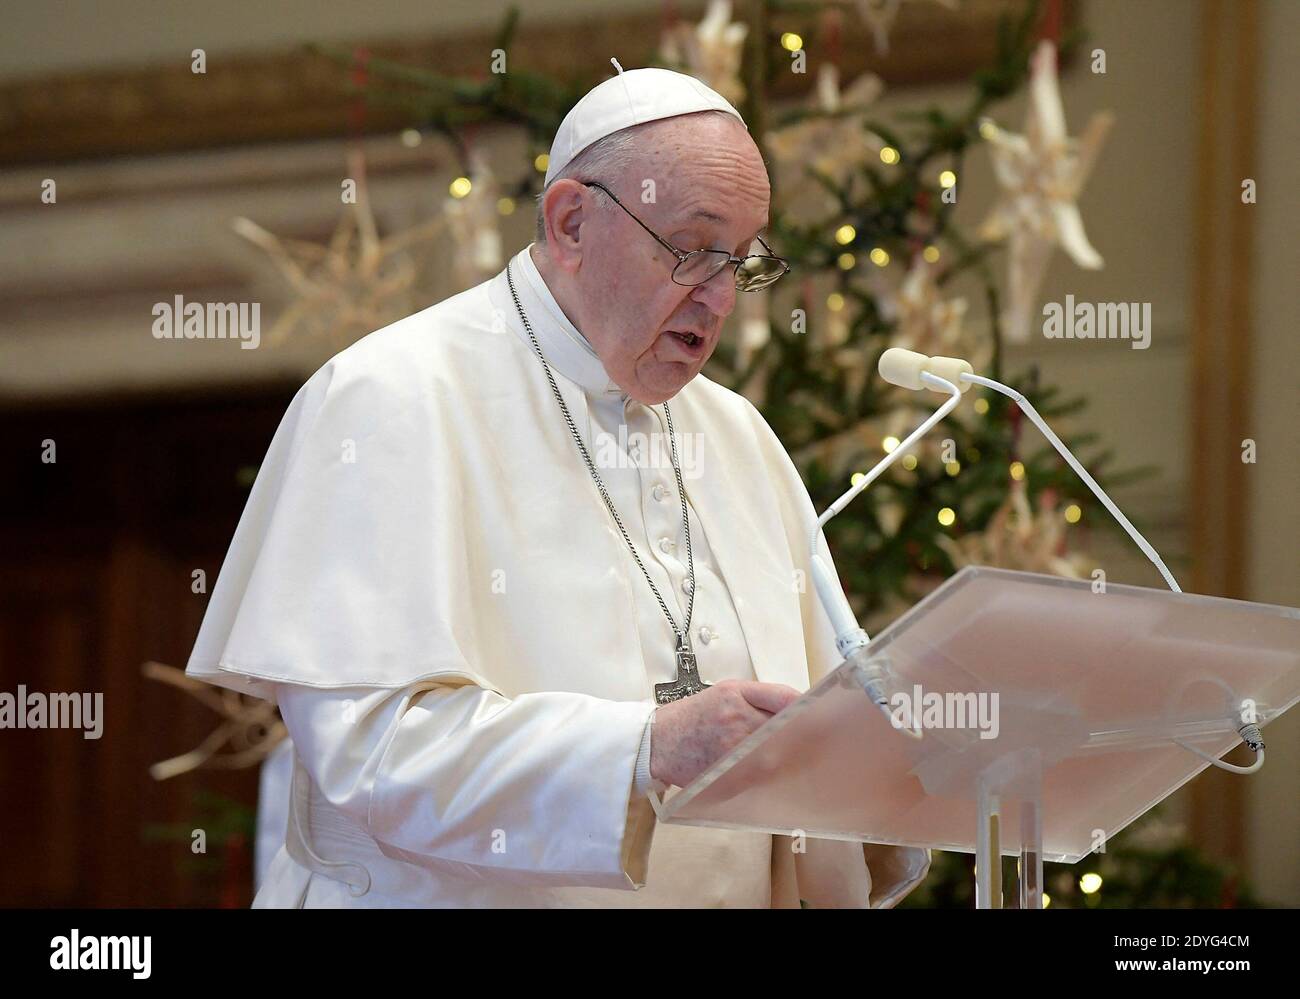 Vatican City, Vatican. 26th Dec 2020. Pope Francis gives his traditional  Christmas message and blessing Urbi et Orbi ('To the City and to the  World') at the Vatican on December 25, 2020.